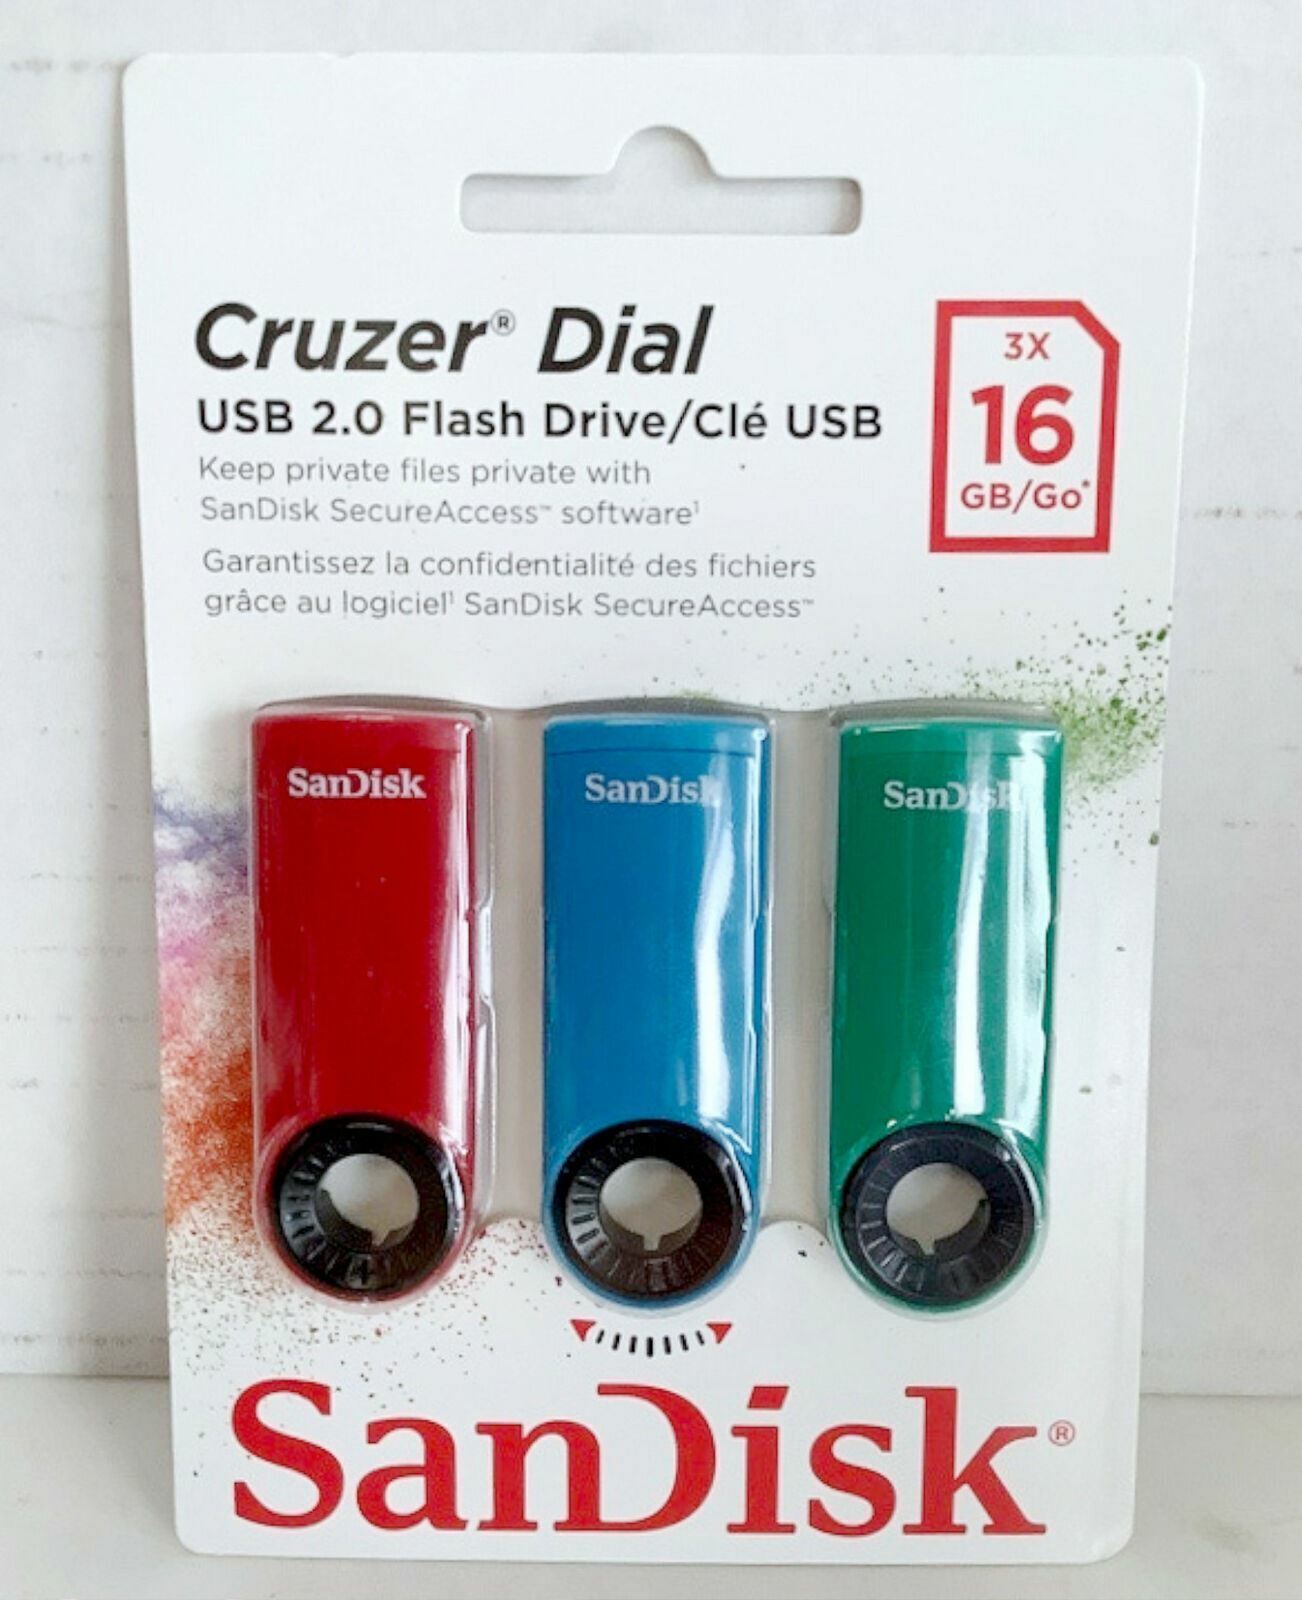 NEW SanDisk 3-Pack Cruzer Dial 16GB USB 2.0 Flash Drives SDCZ57-016G-A46T